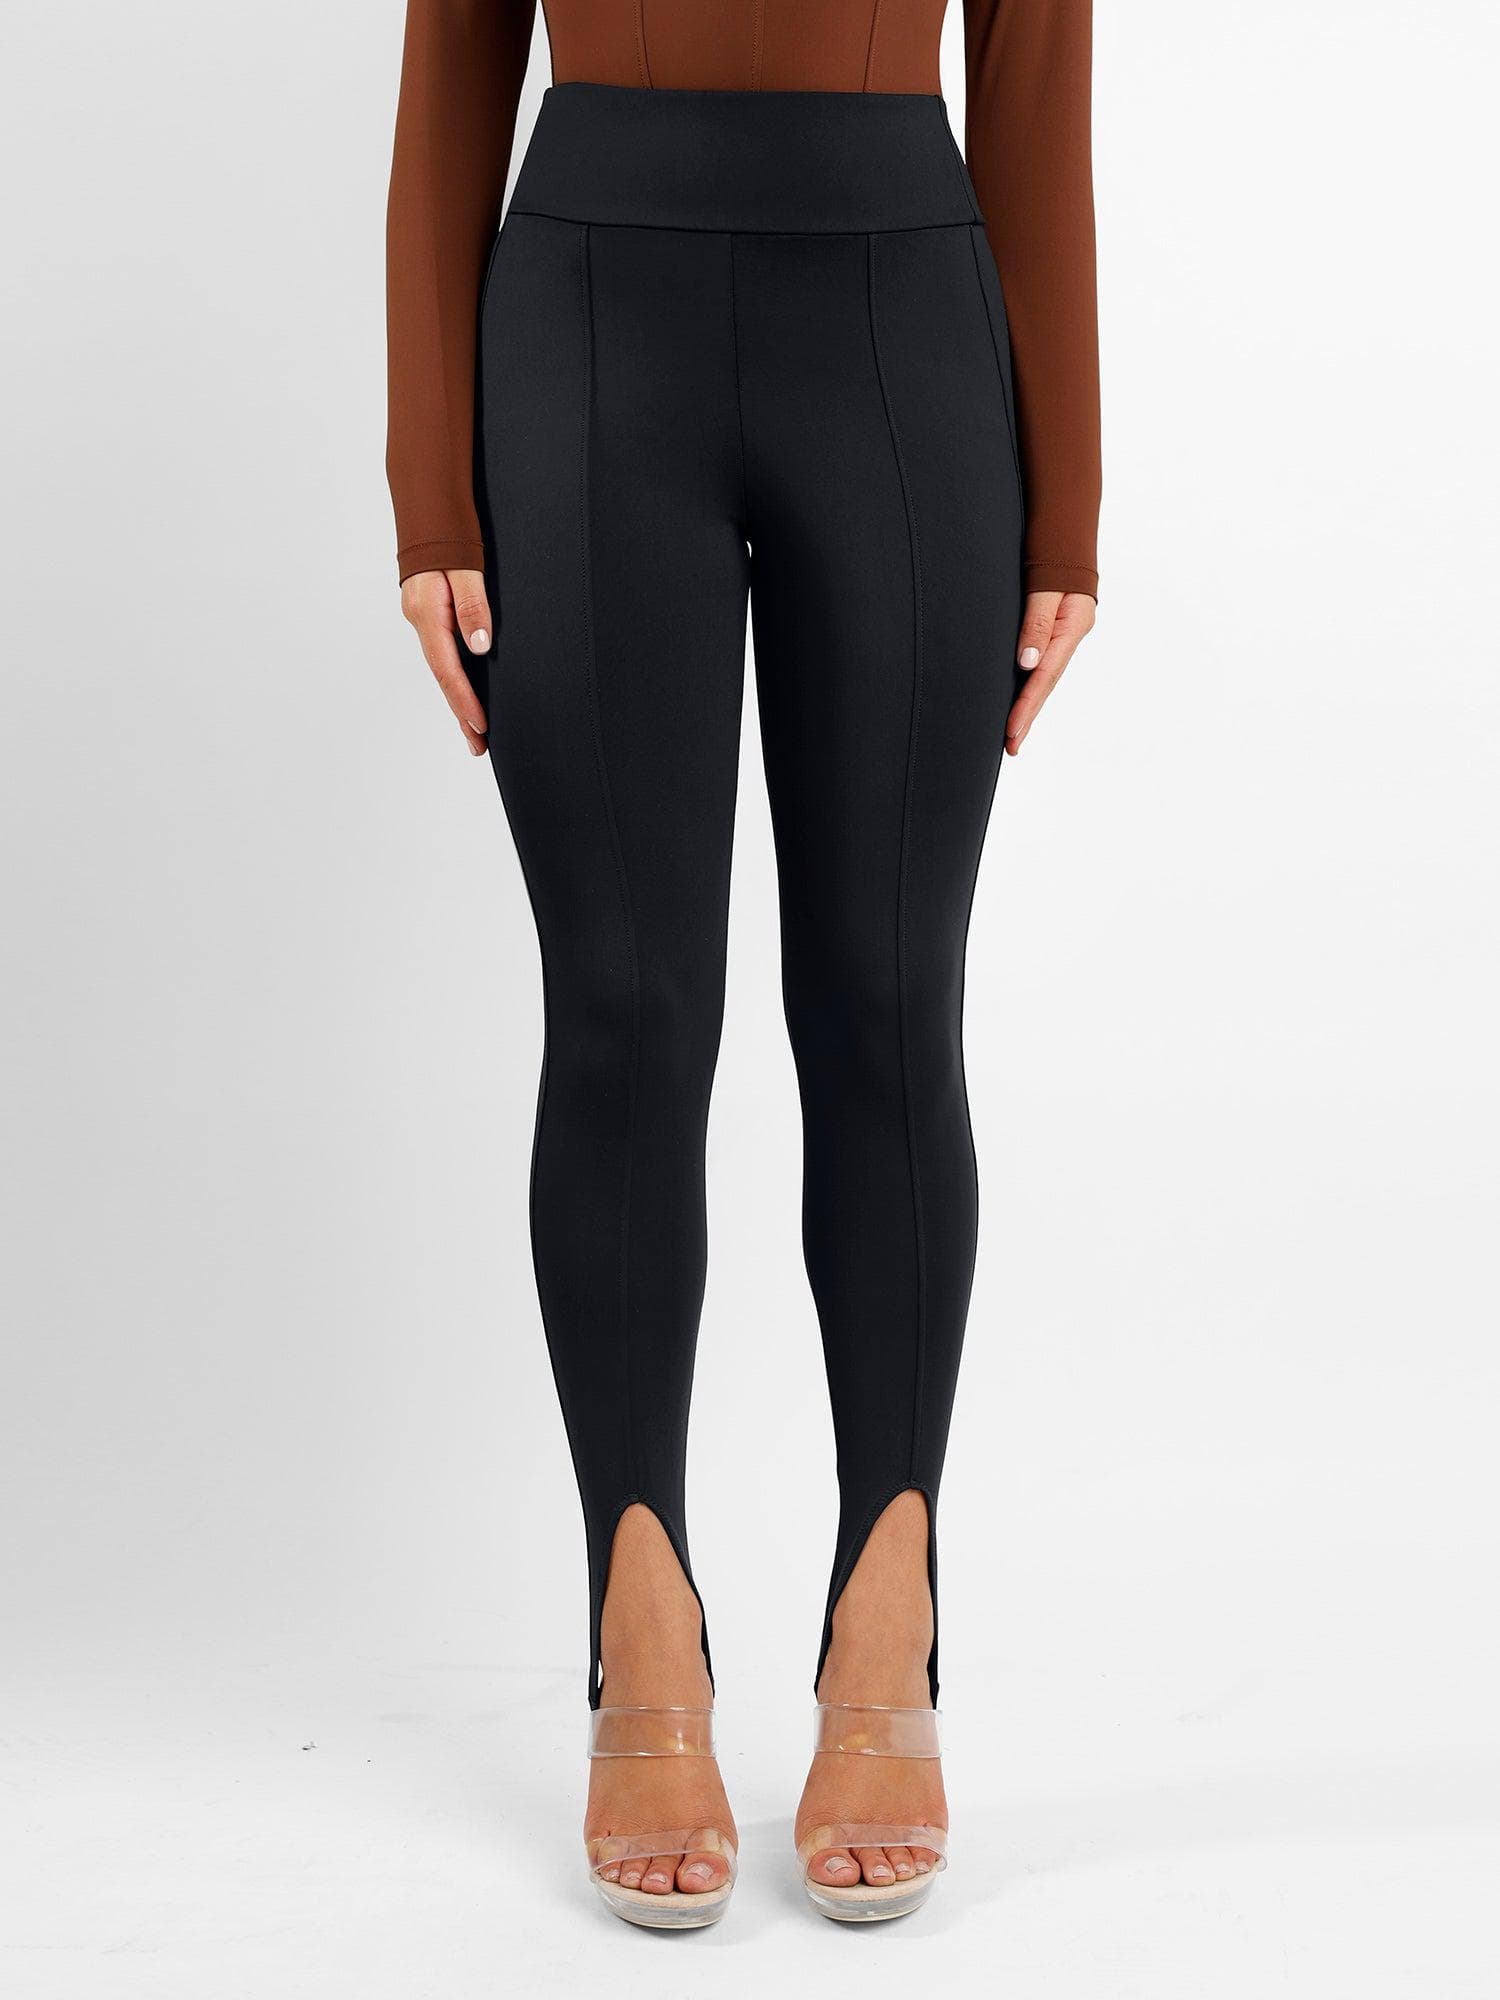 Sport Legging with built in Girdle - Sport and Casual pants with